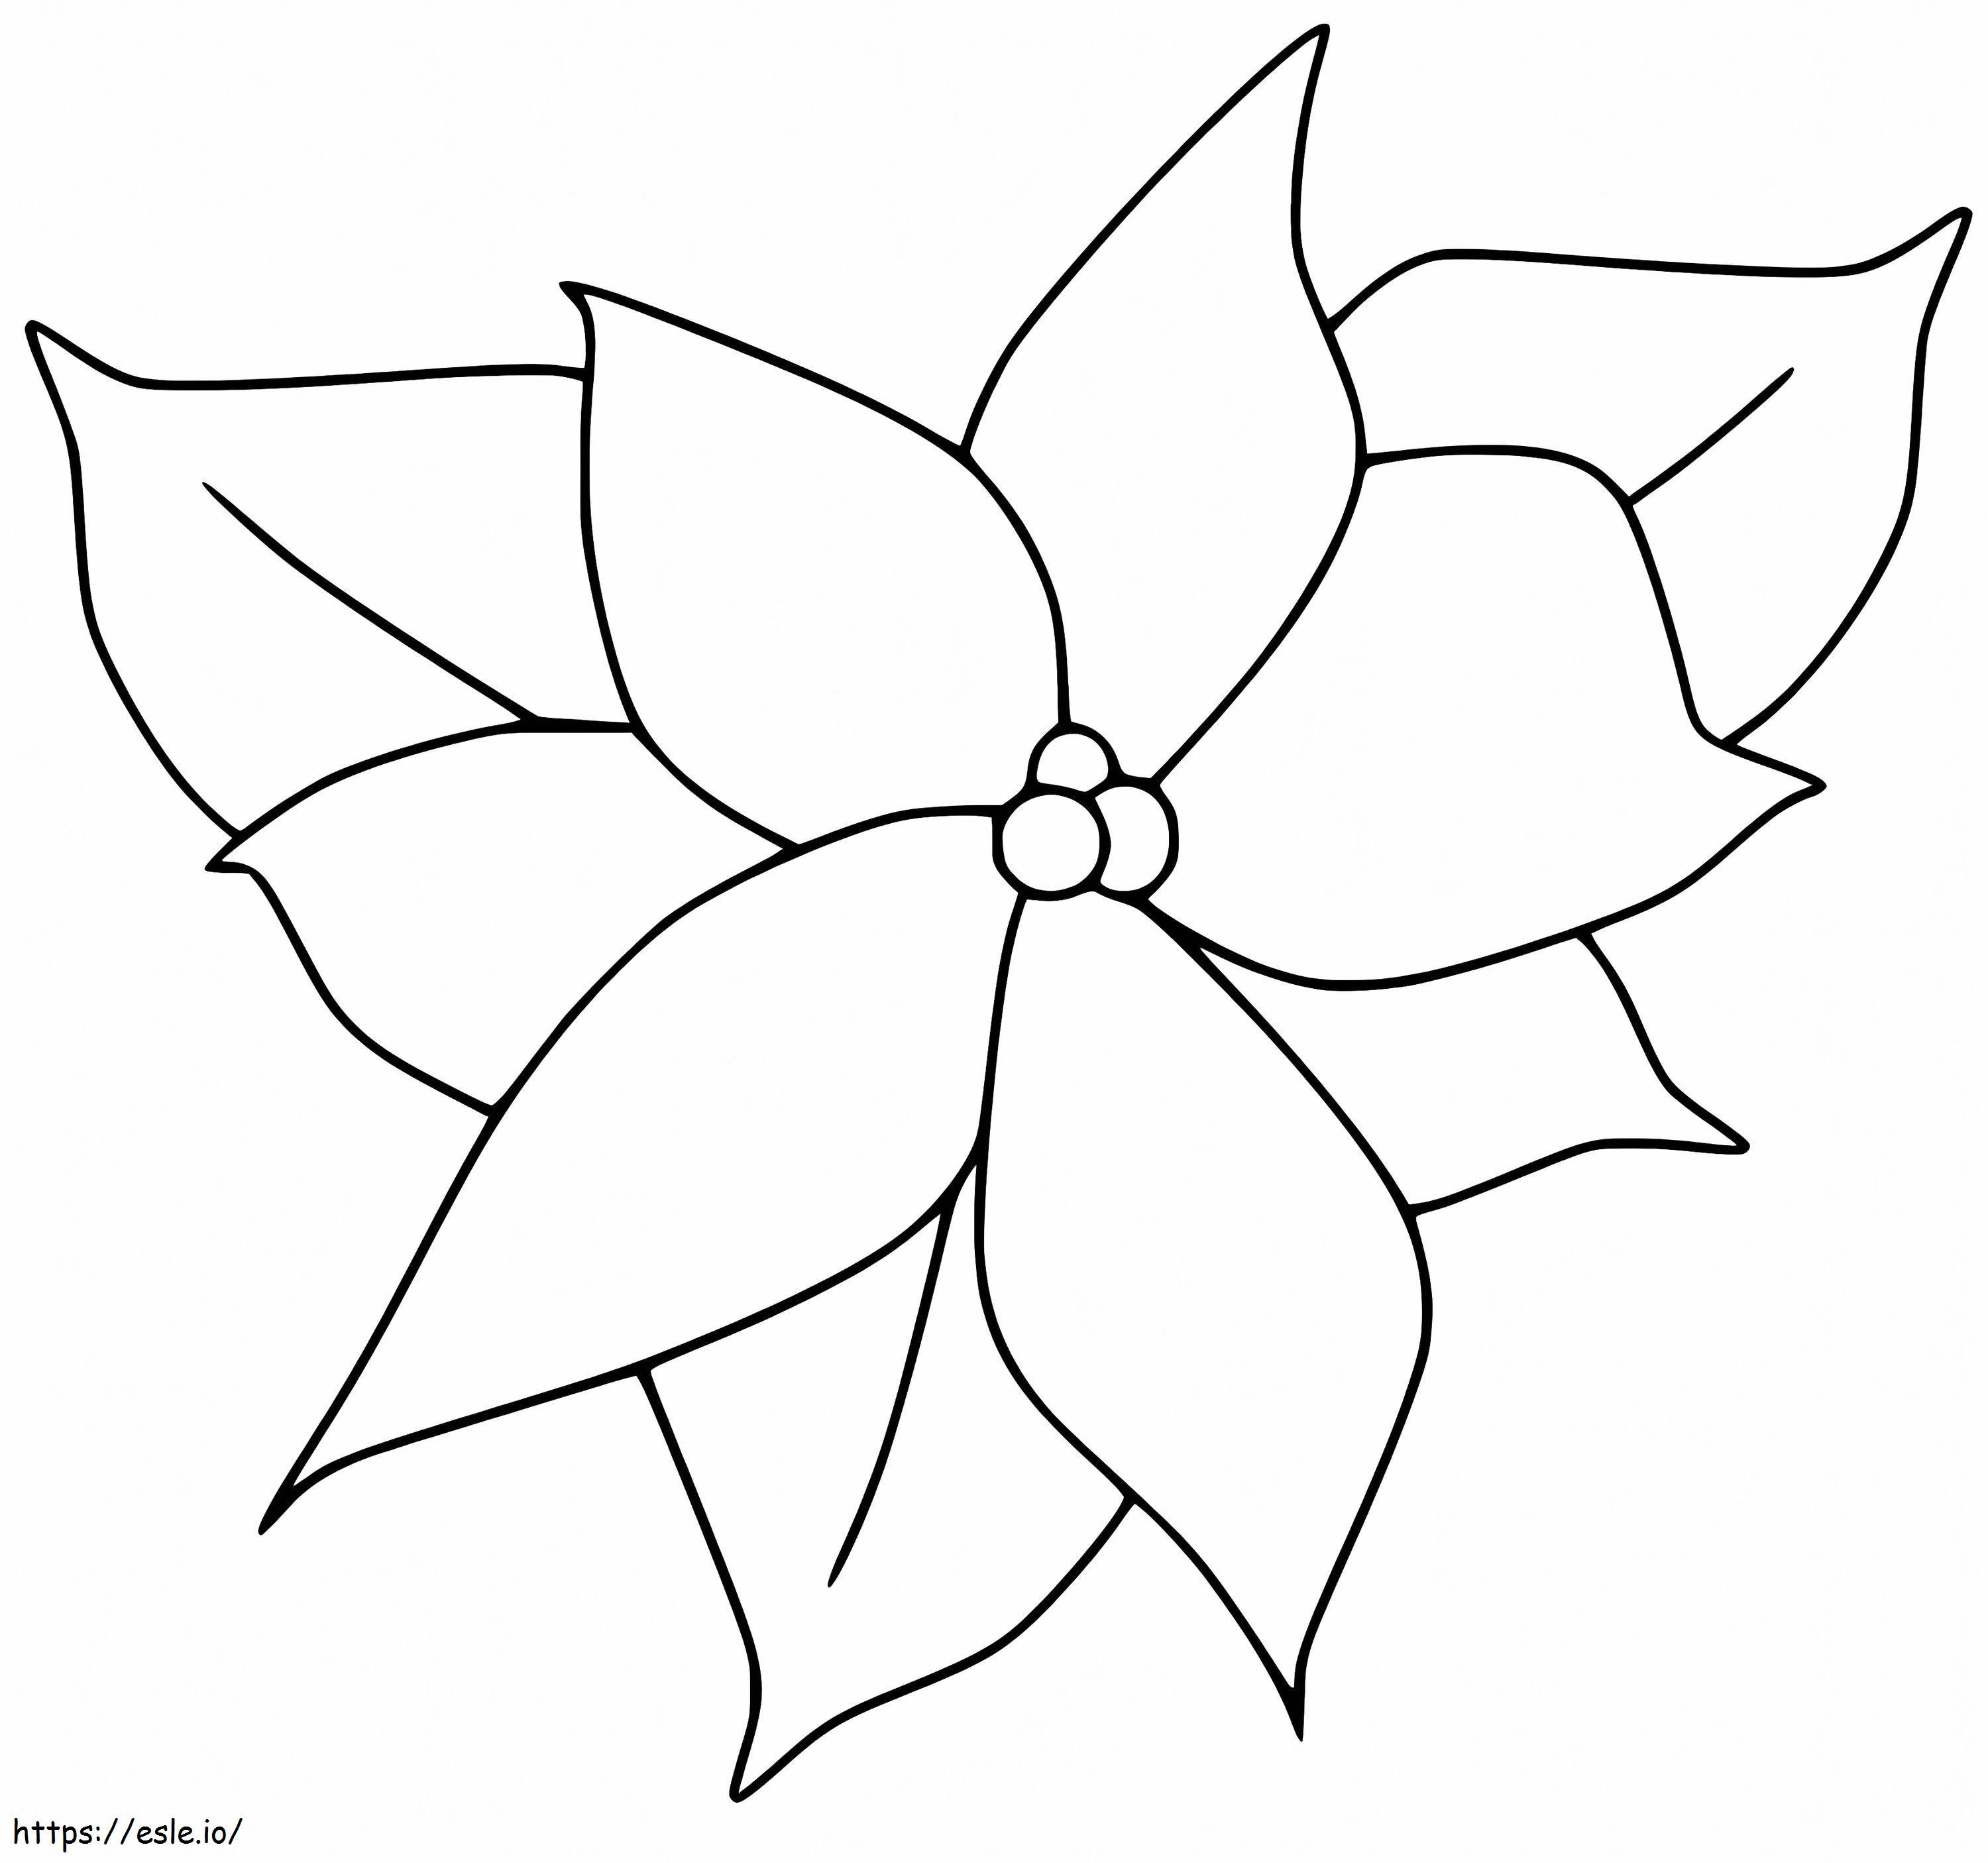 Simple Poinsettia Flower coloring page